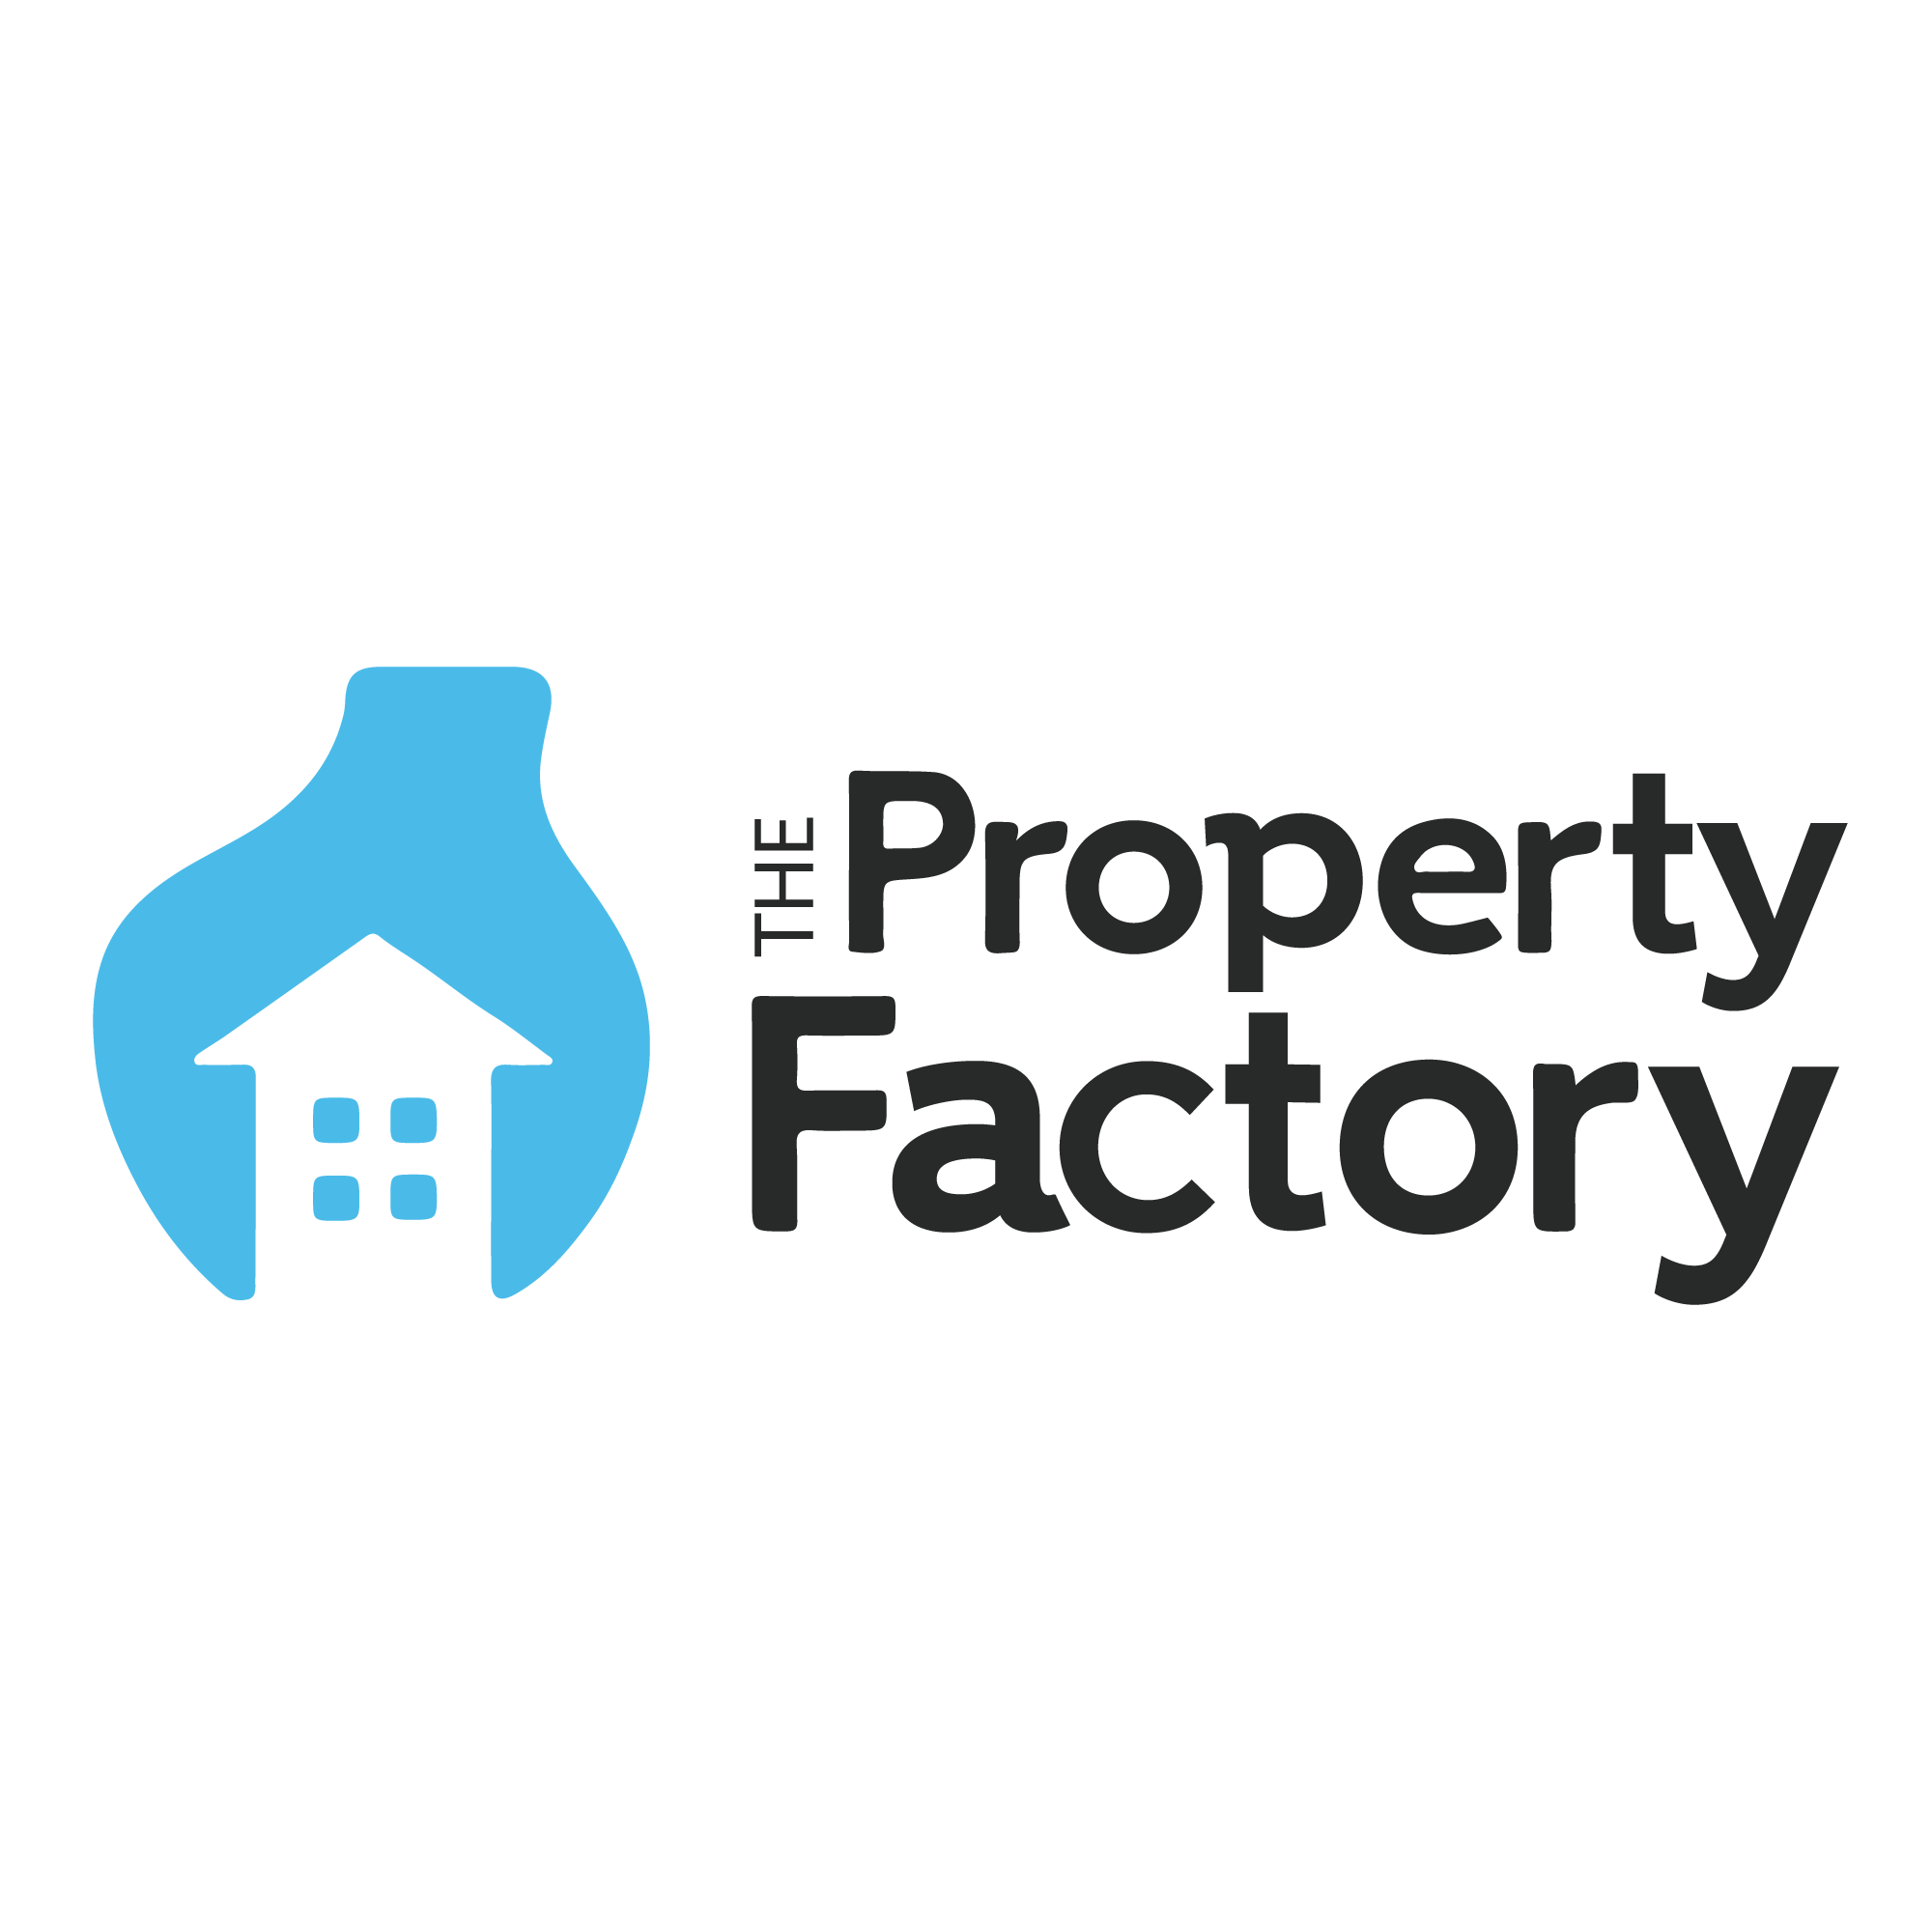 The Property Factory